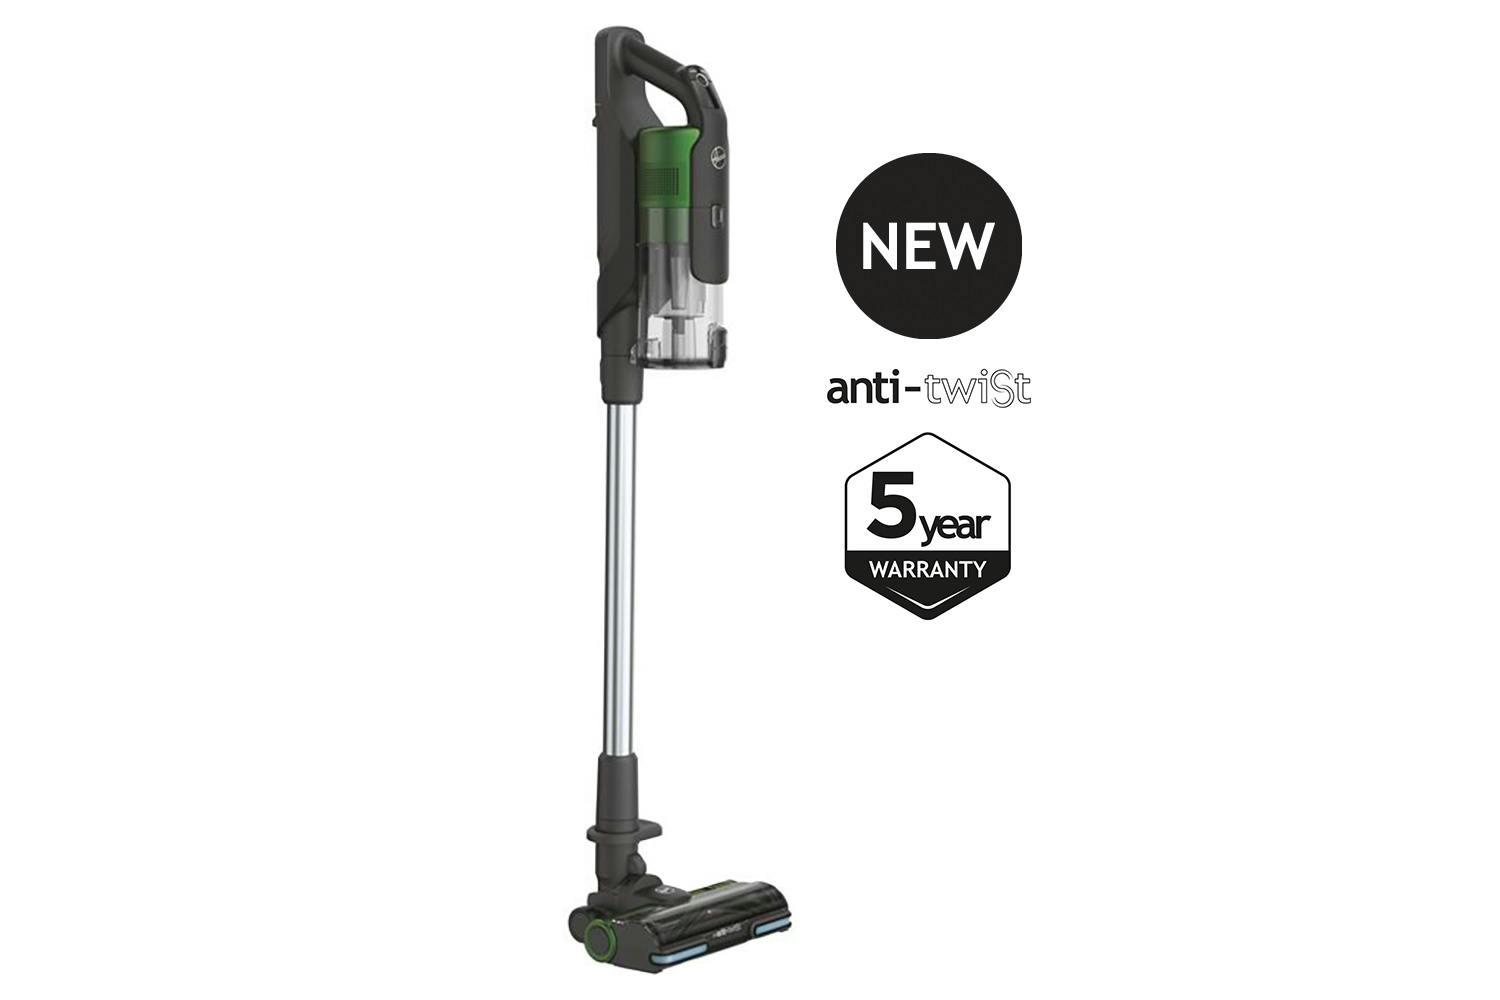 Hoover HF9 Cordless Pets Double Battery Vacuum Cleaner, HF920P